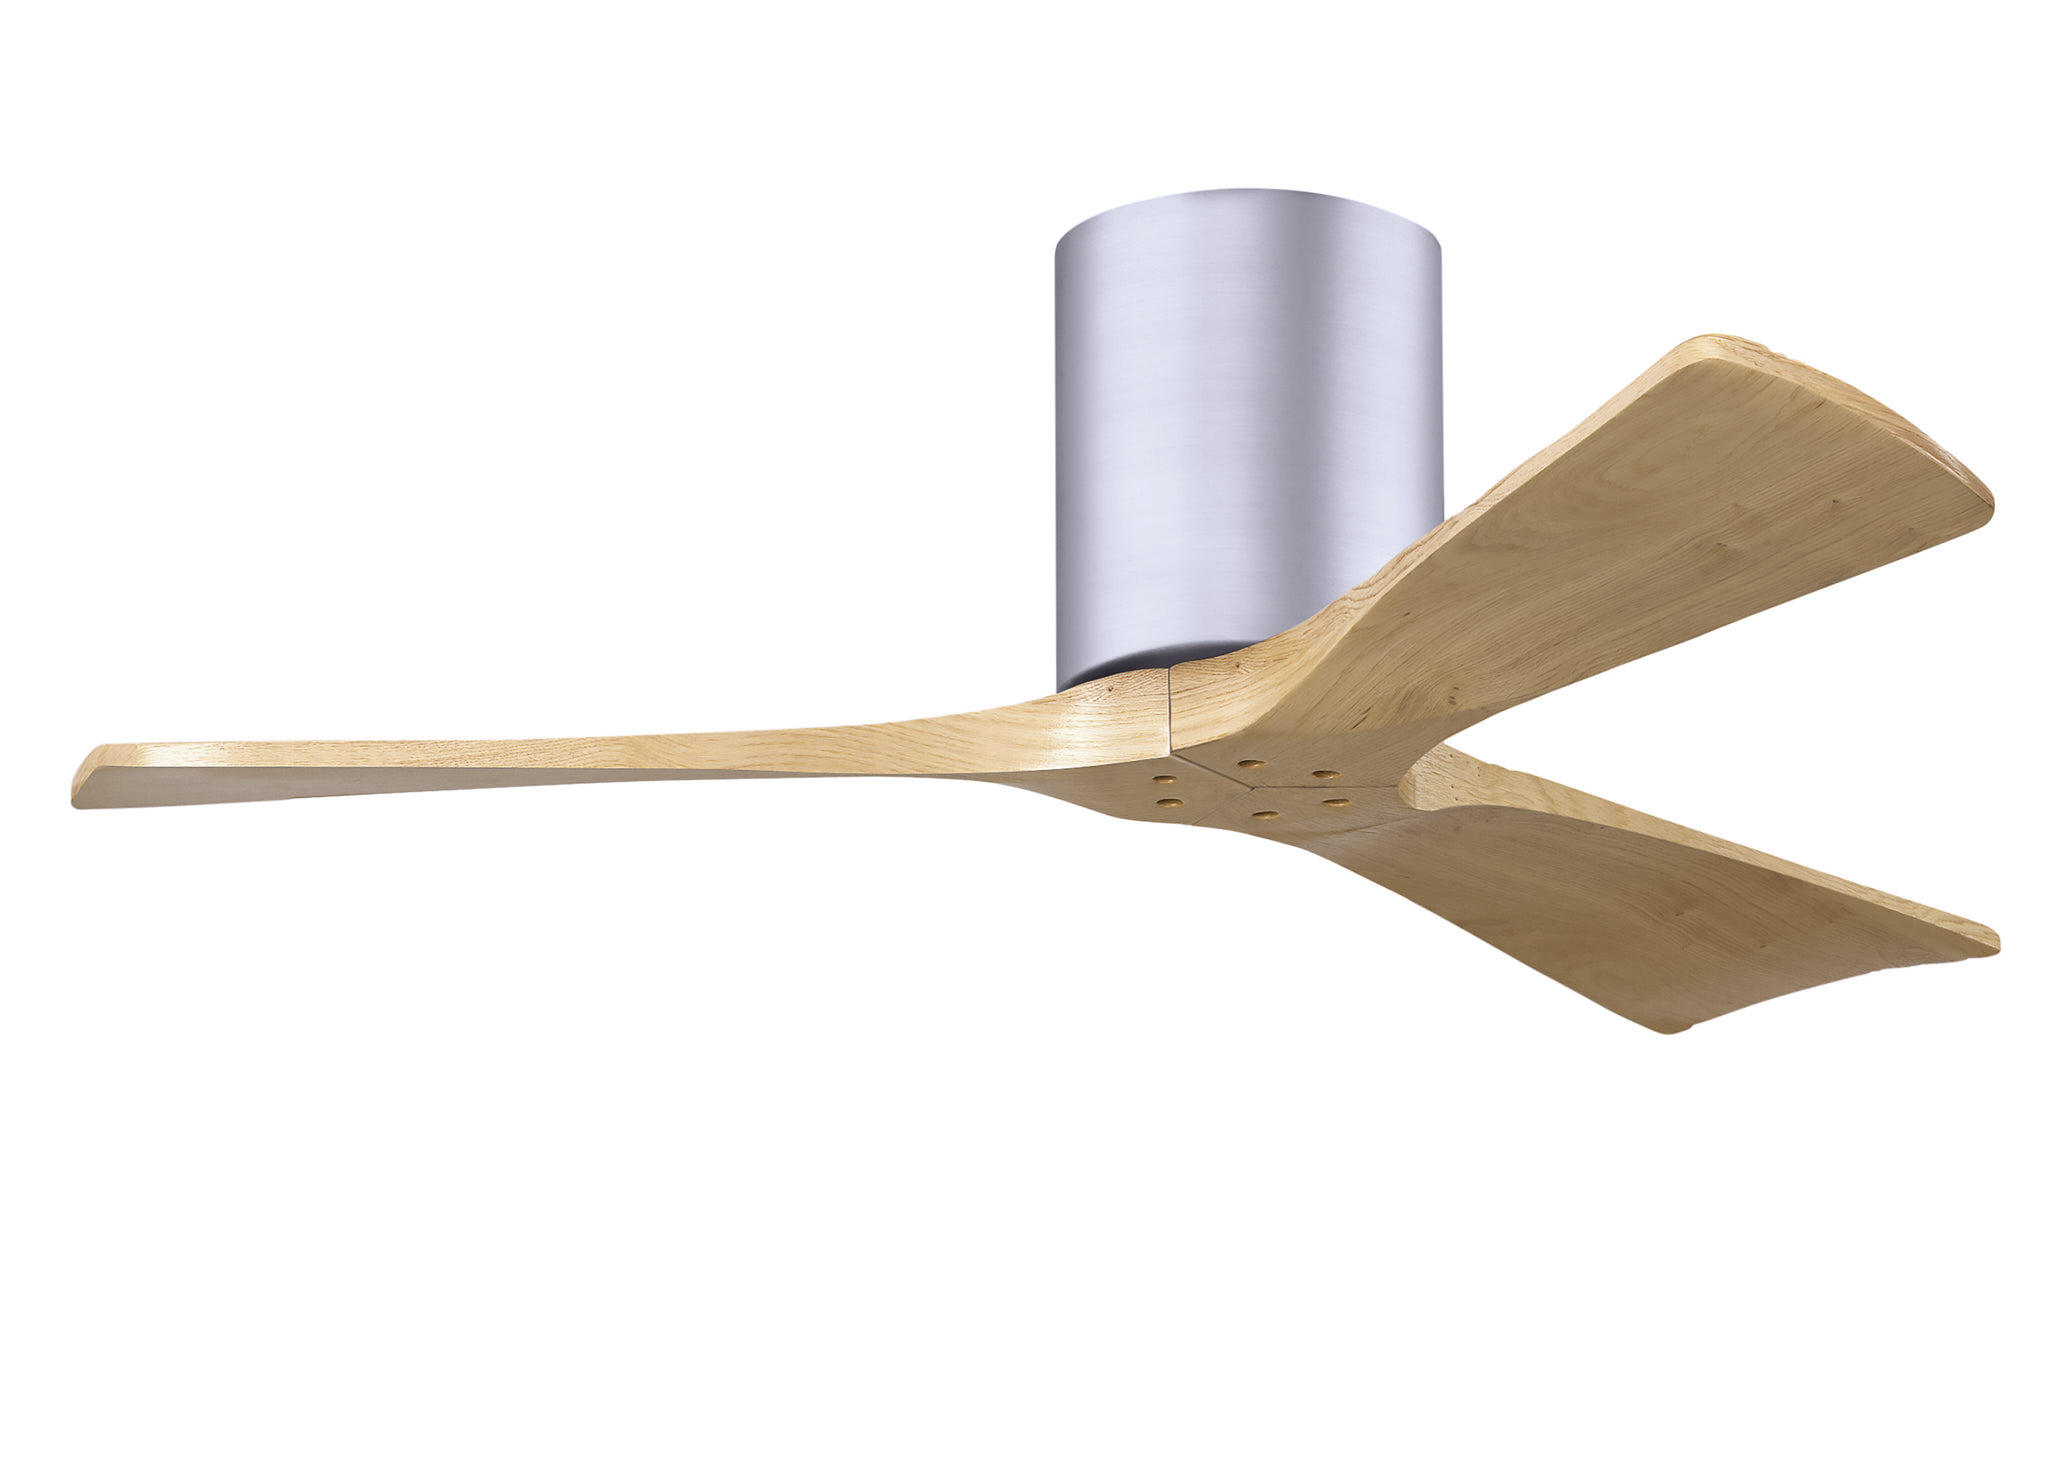 Irene-3H 6-speed ceiling fan in brushed nickel finish with 42